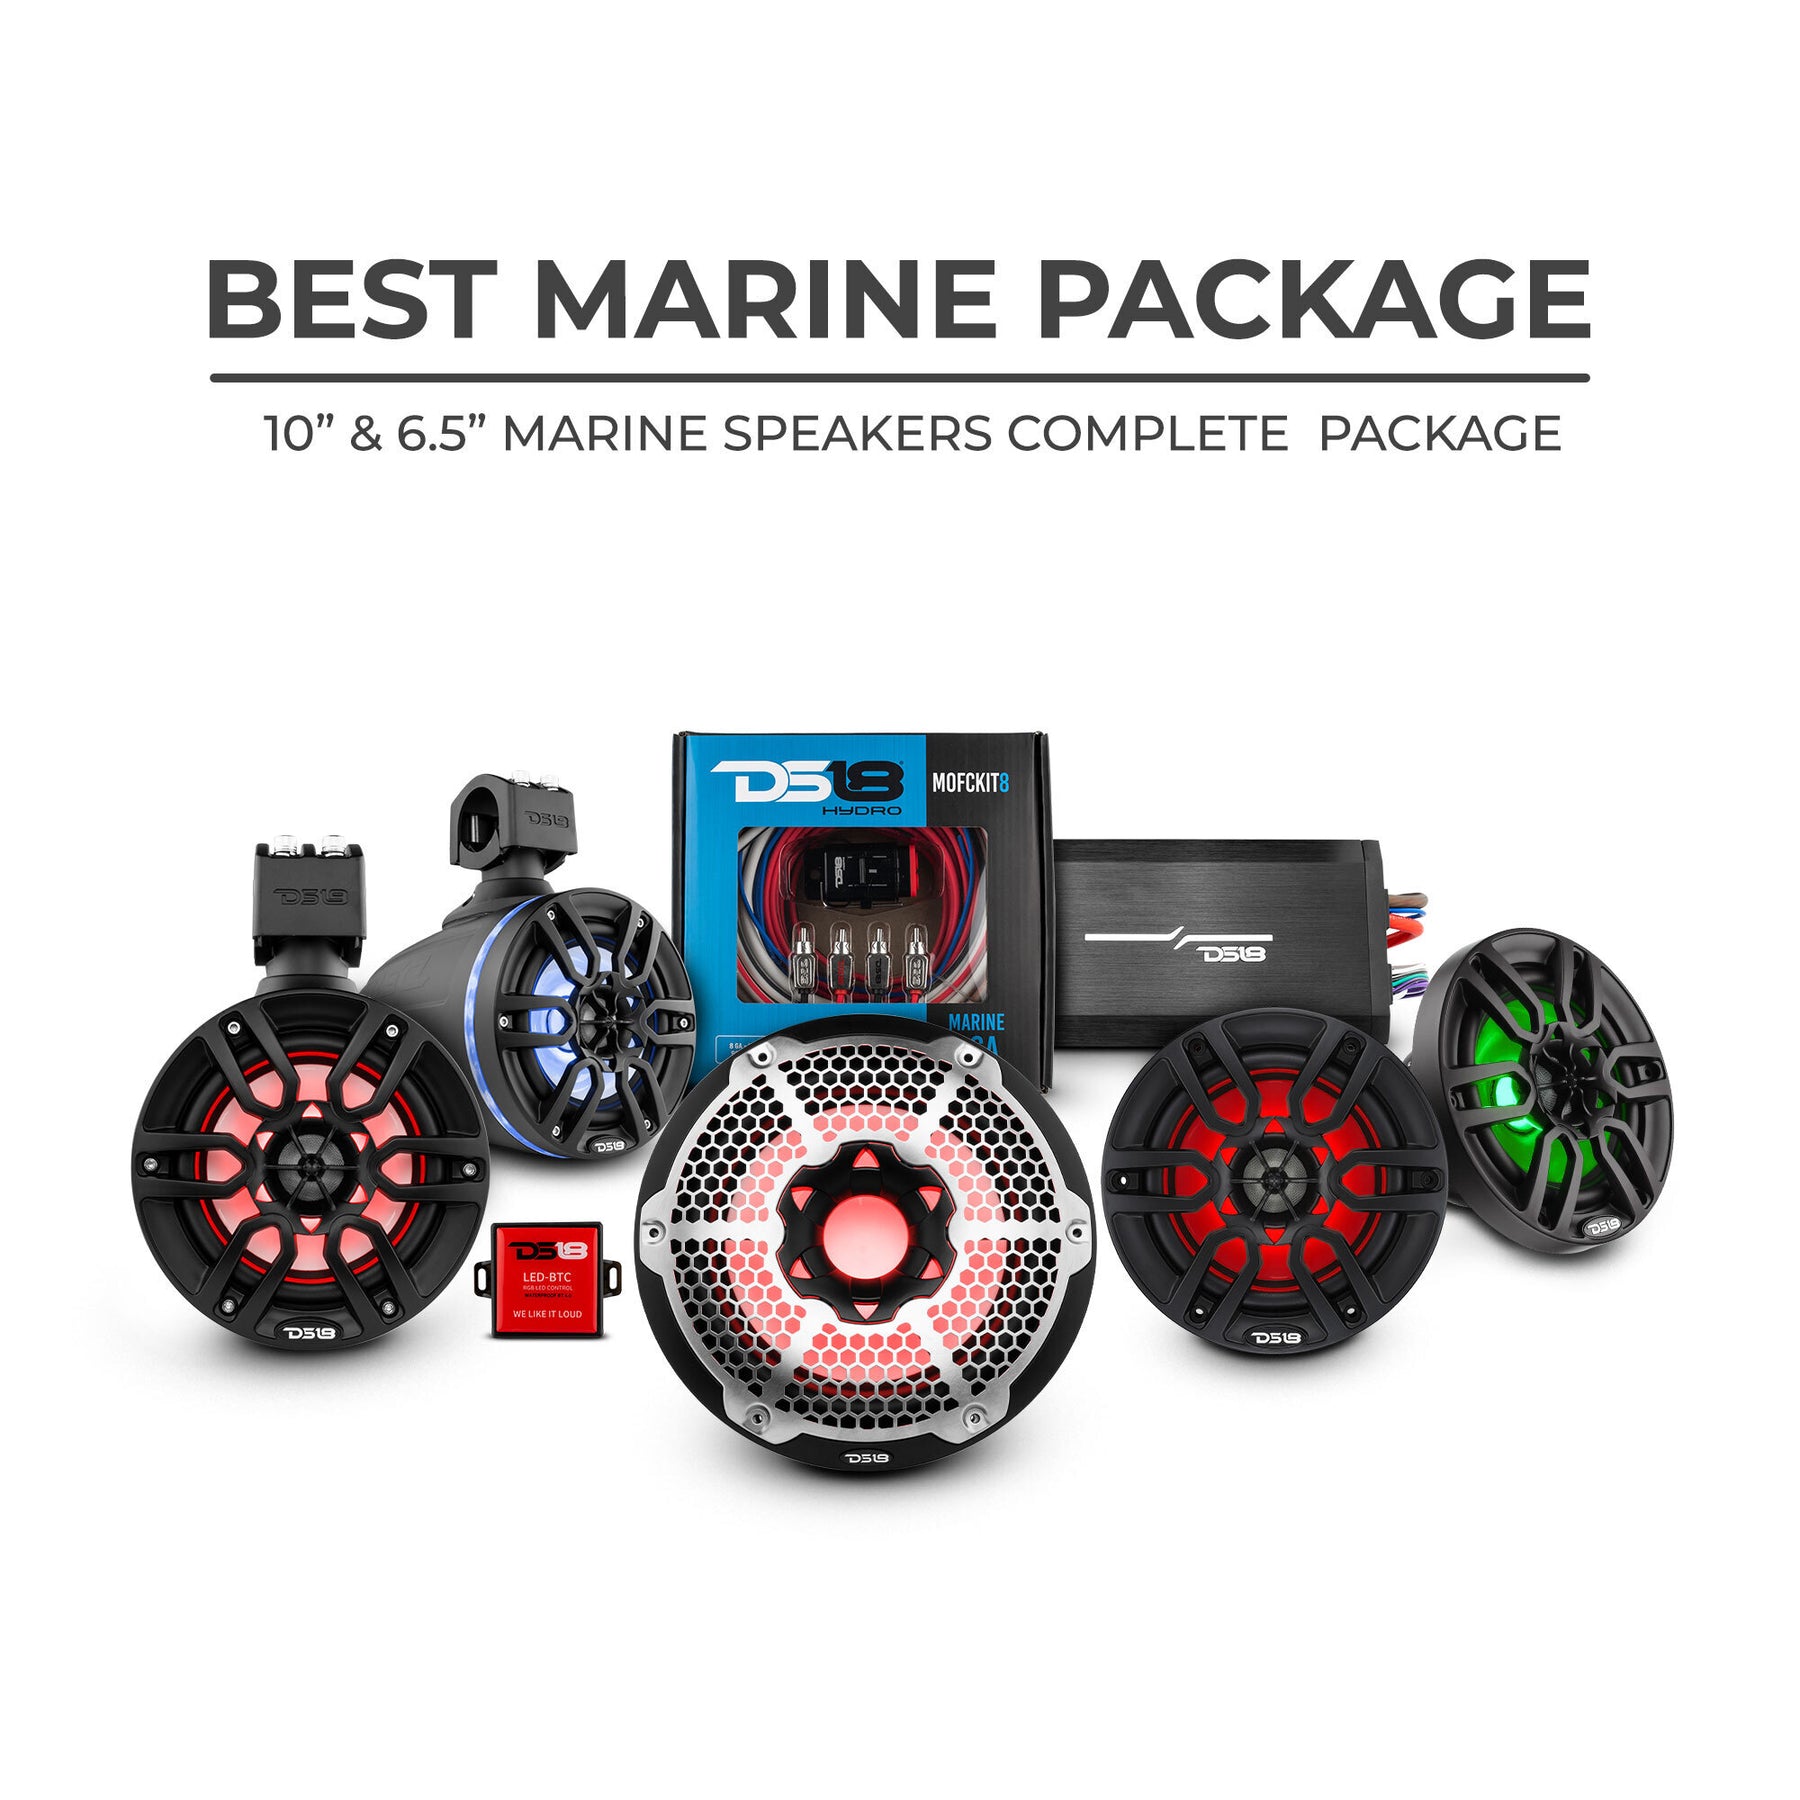 DS18 Best Marine Stereo Subwoofer Package  1 x 10” Subwoofer | 2 x 6.5” Speaker Tower | 2 x 6.5” Marine Speaker | 1 x 5 Ch Amplifier | 1 x MOFCKIT4 and 1 x LED-BTC